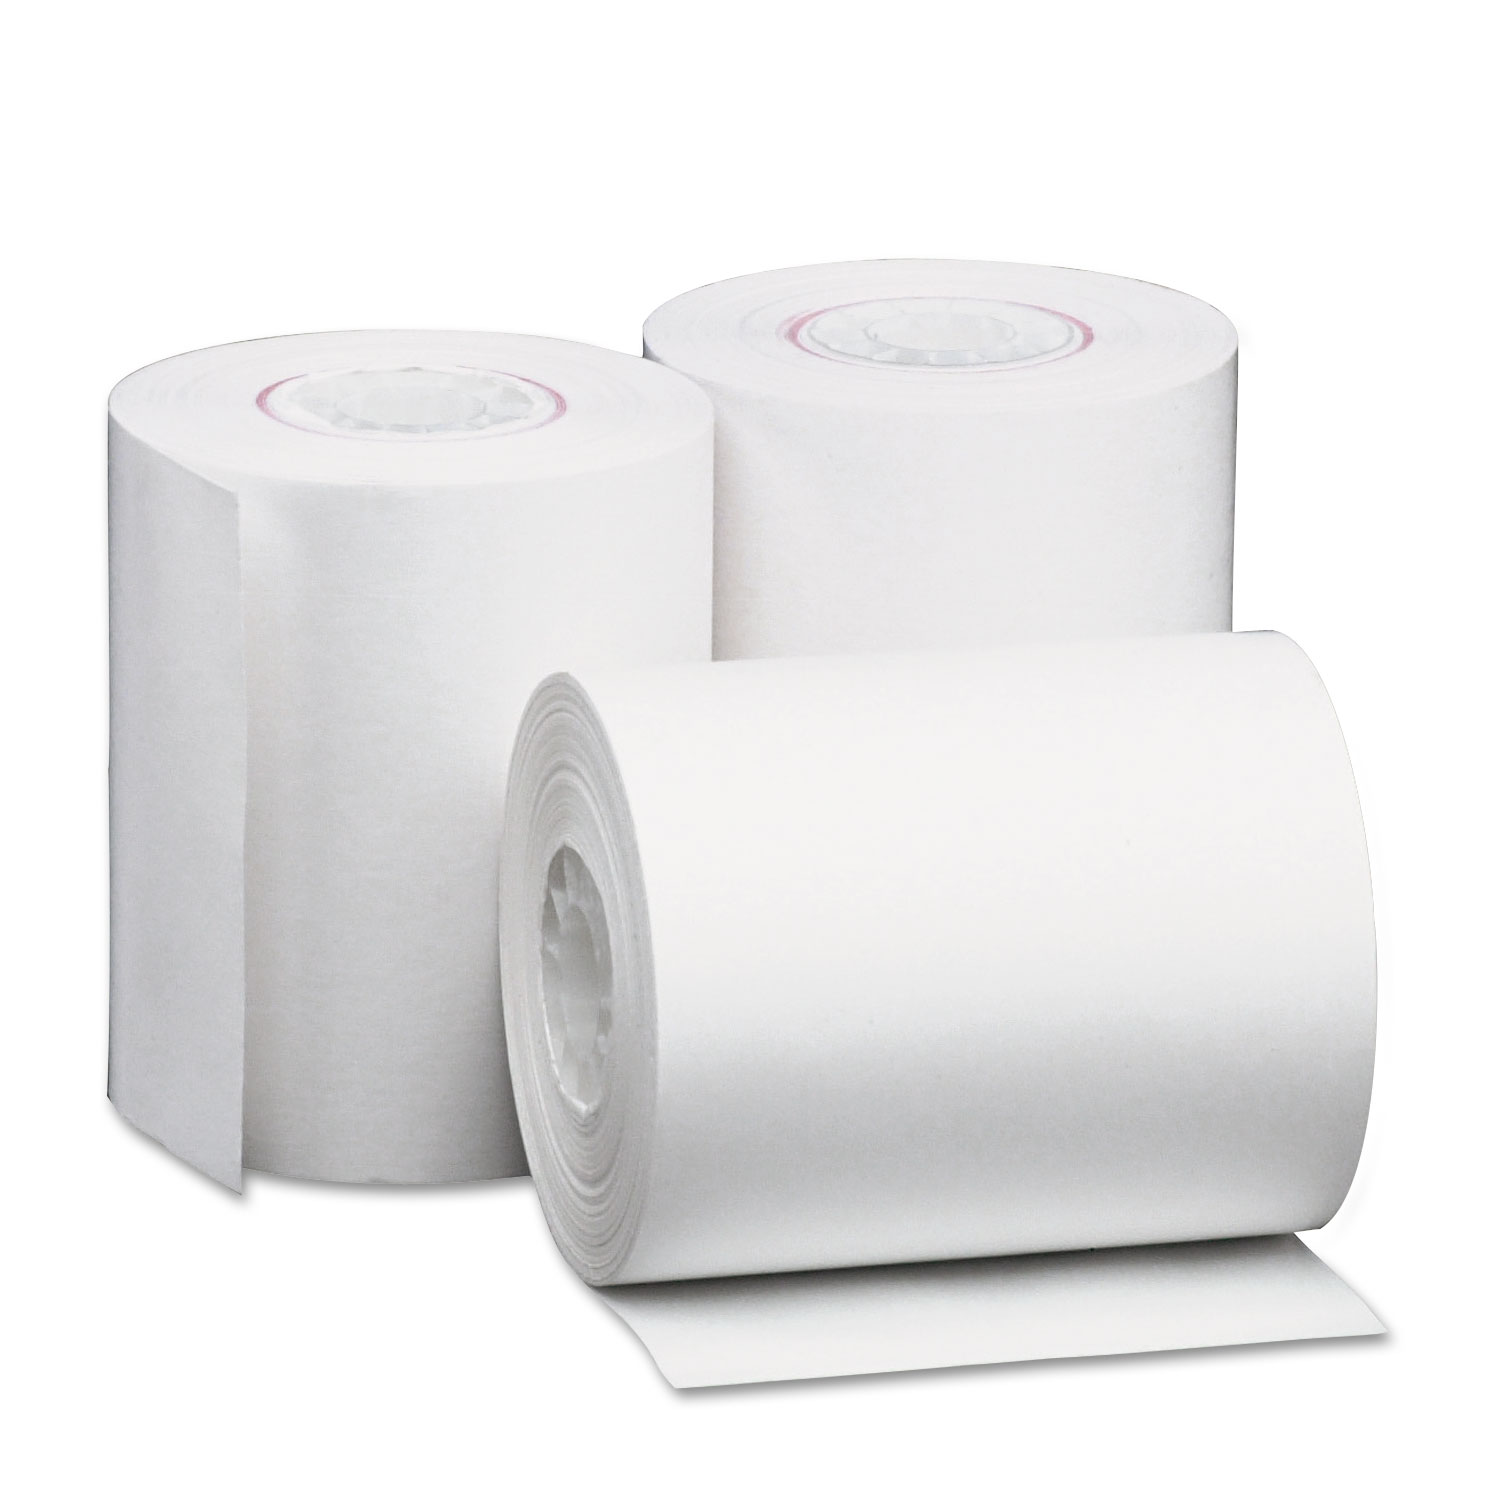  Universal UNV35760 Direct Thermal Printing Paper Rolls, 2.25 x 80 ft, White, 50/Carton (UNV35760) 